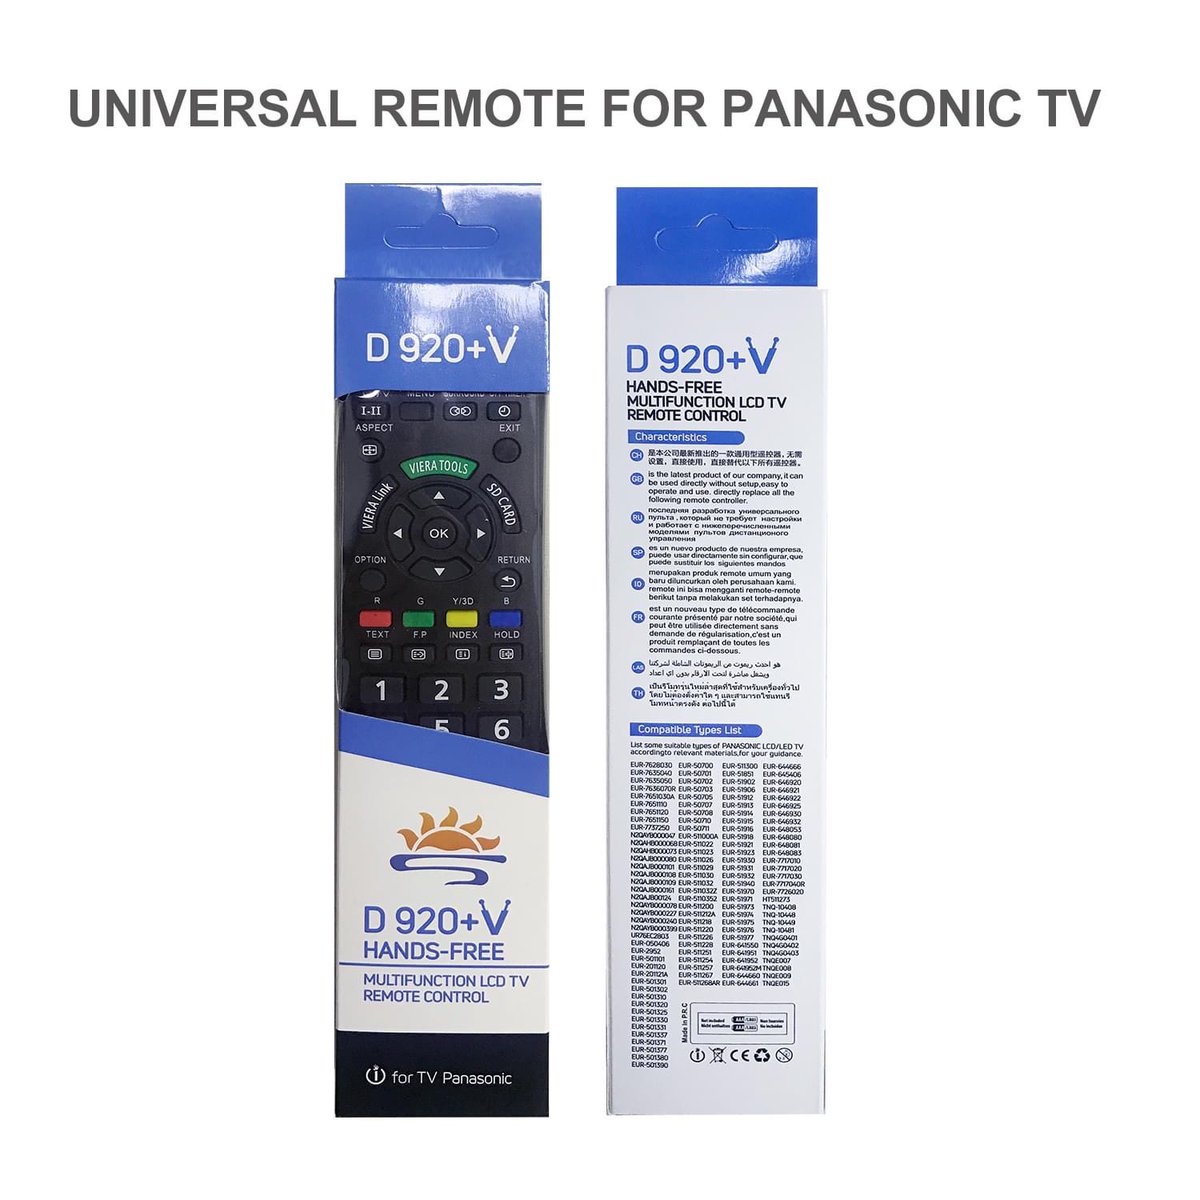 D920+V Universal TV Remote Control for PANASONIC Smart TV
For More Detail, Pls Contact us.  Phone num:+86 139 2218 6676  Online Store: systo.en.alibaba.com #remotecontrol #tvremote #fypシ #panasonictvremote #fyp